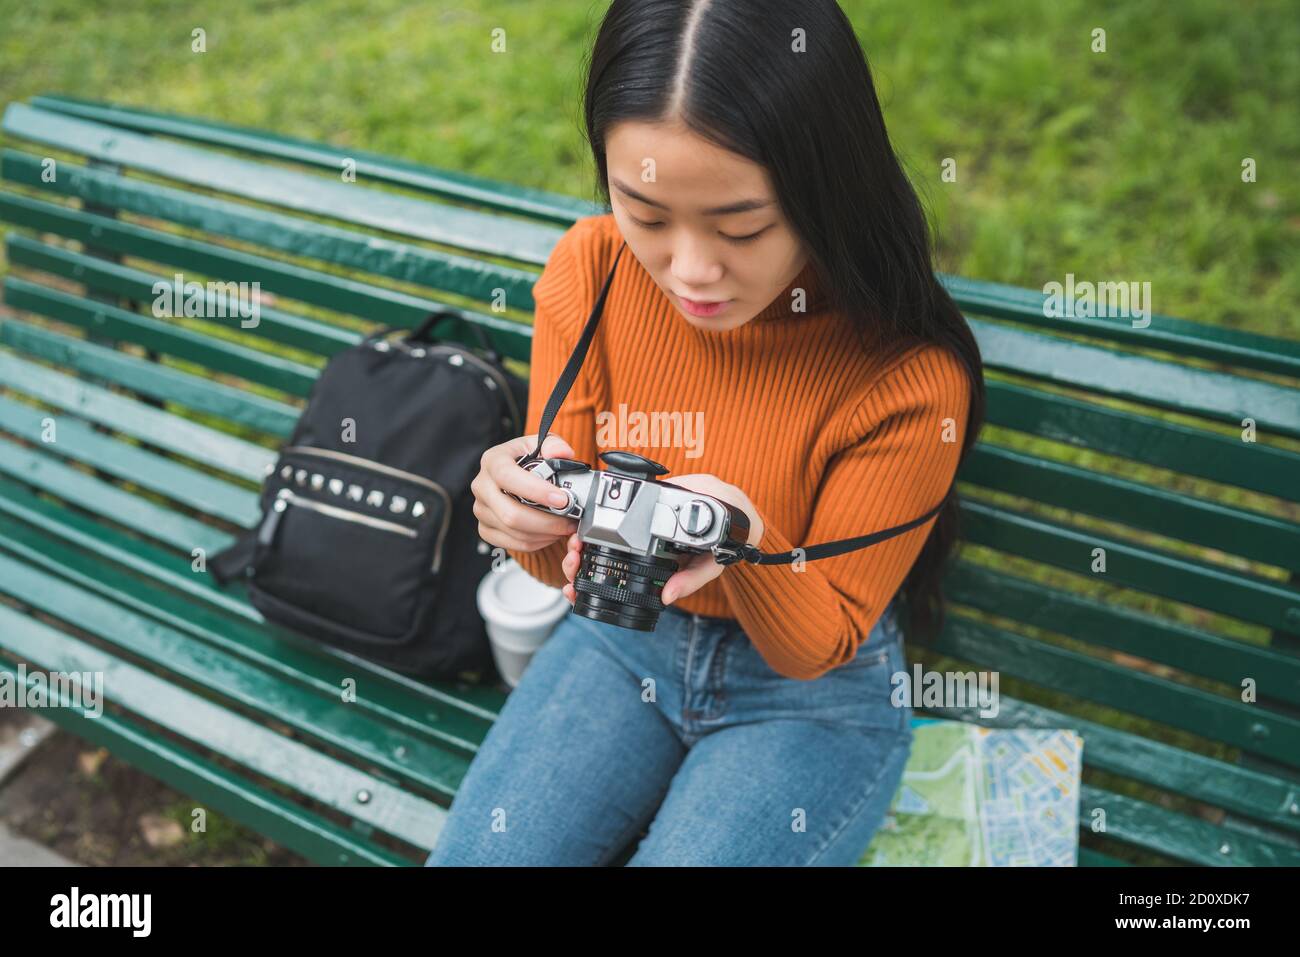 Portrait of young Asian woman using a professional digital camera in the park outdoors. Photography concept. Stock Photo